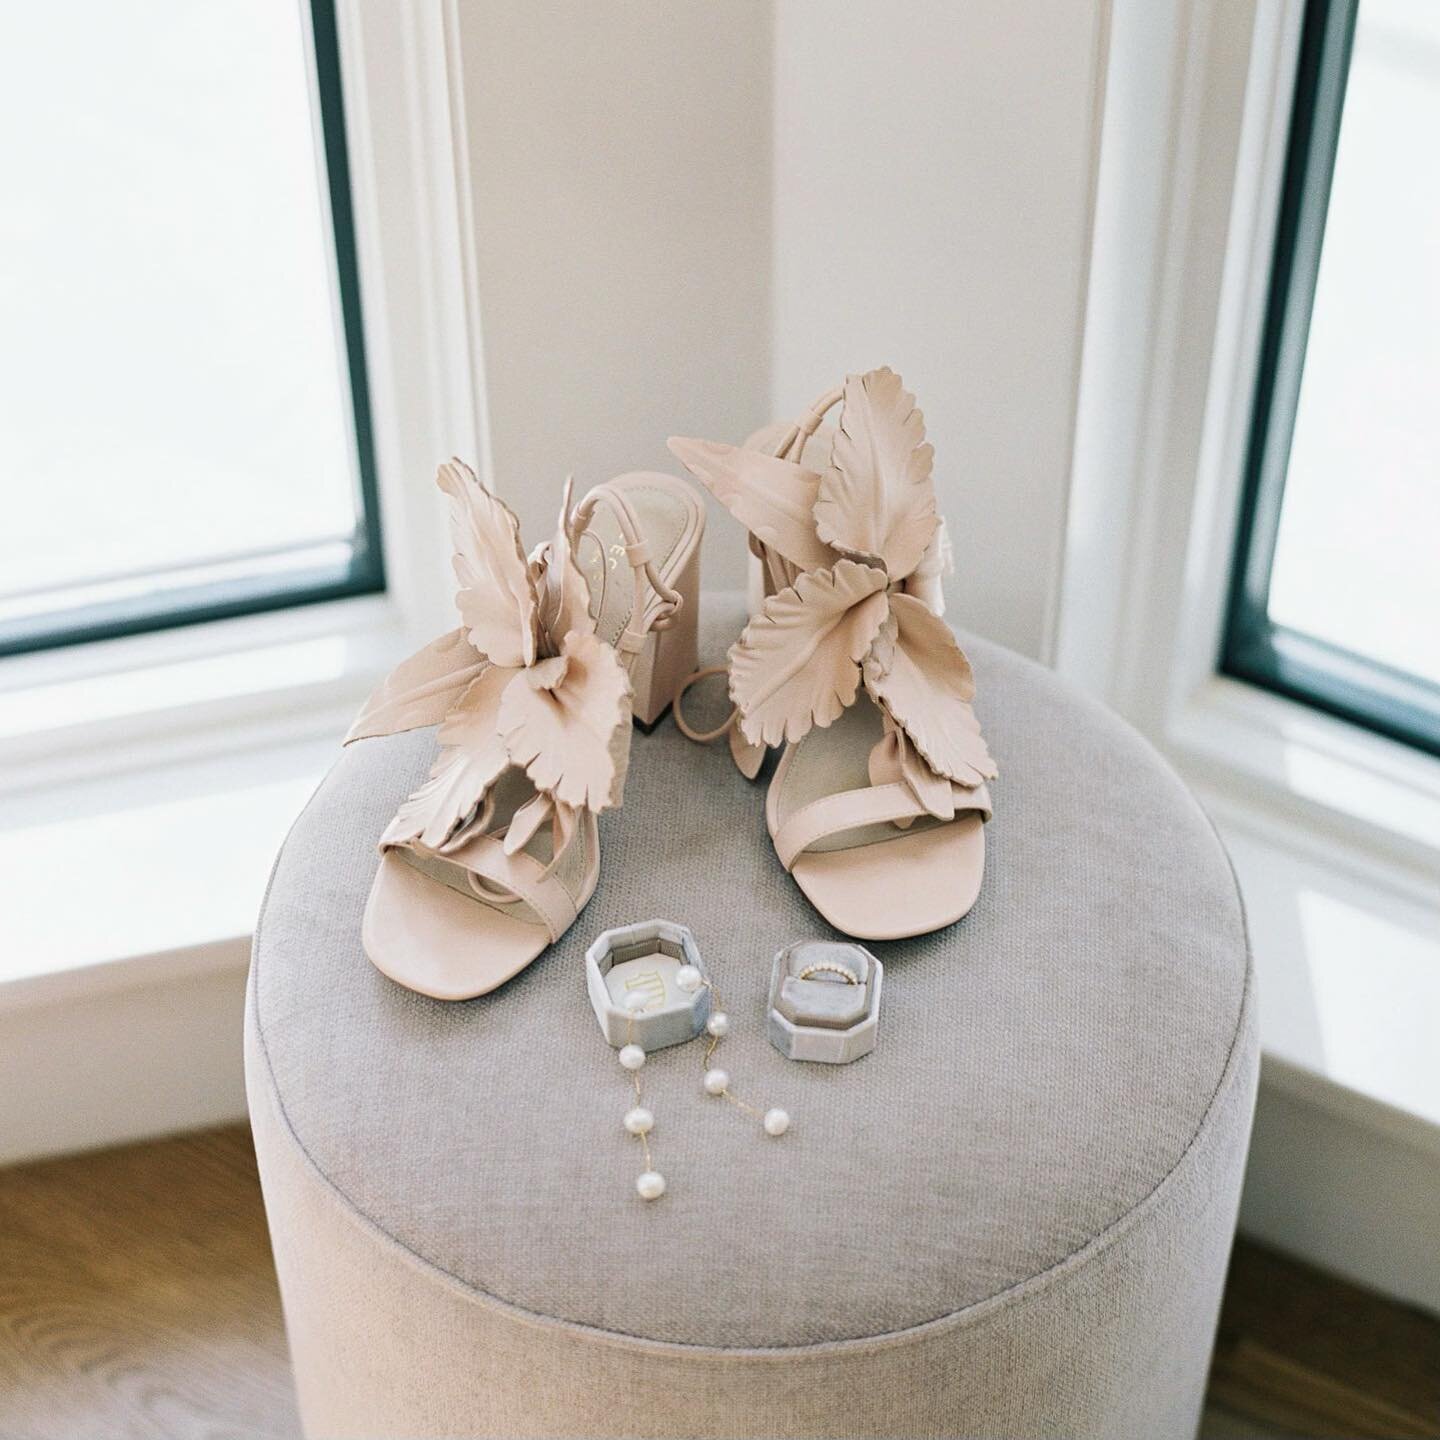 Your accessories deserve their moment too

&hellip;

@amandaoliviaphoto @whitewoodevents @amyosaba @marywynn @tablemade bbjlinen @eastonfilmco @atlantapartyrentals  @theimpressionist @erinryser @whiteorchidbridal @radialentertainment @turnipbloodblac